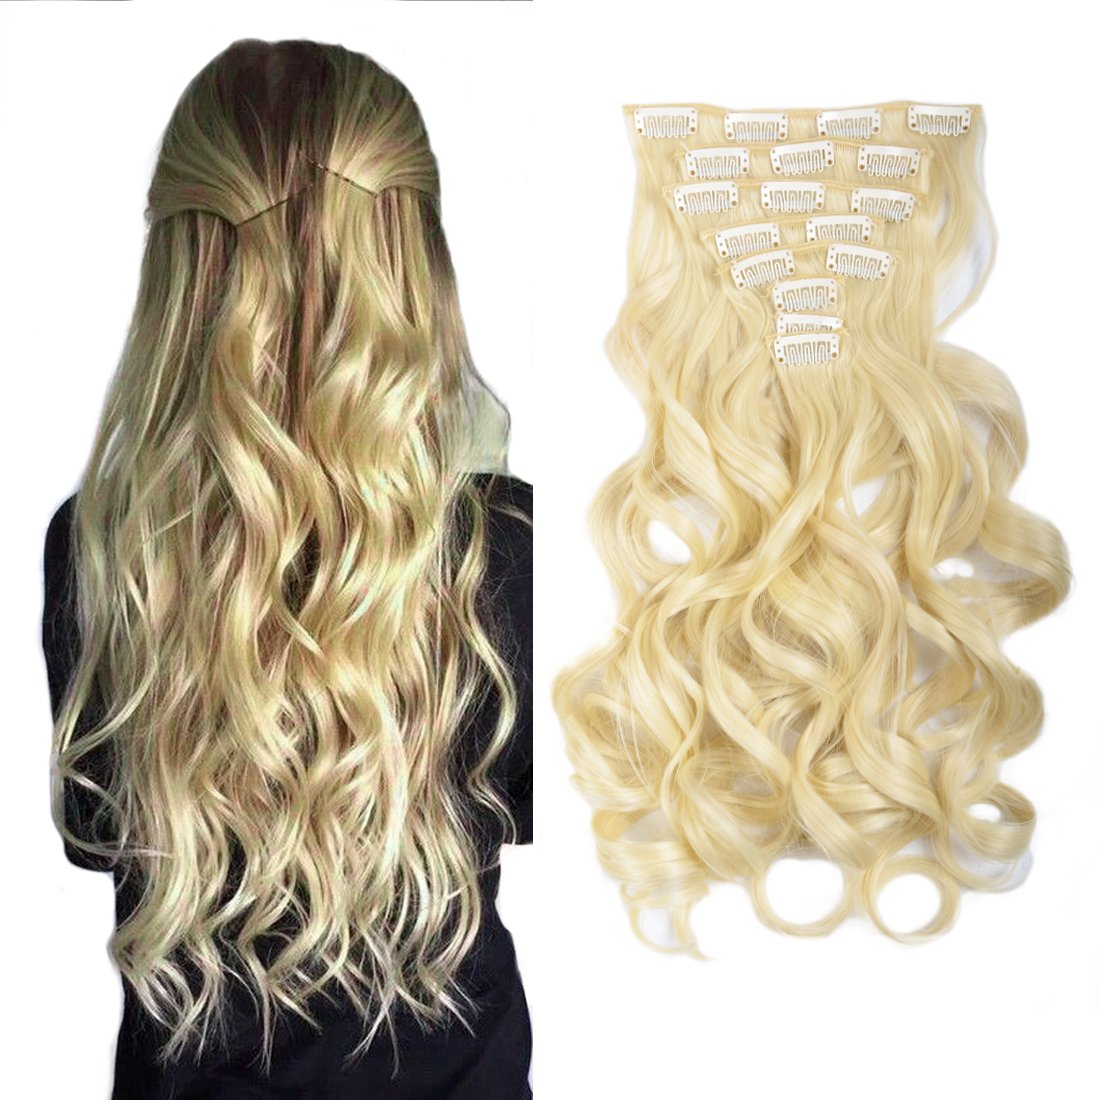 Other Hair Extensions Weaves Mshair 8 Pieces 24 Curly Full